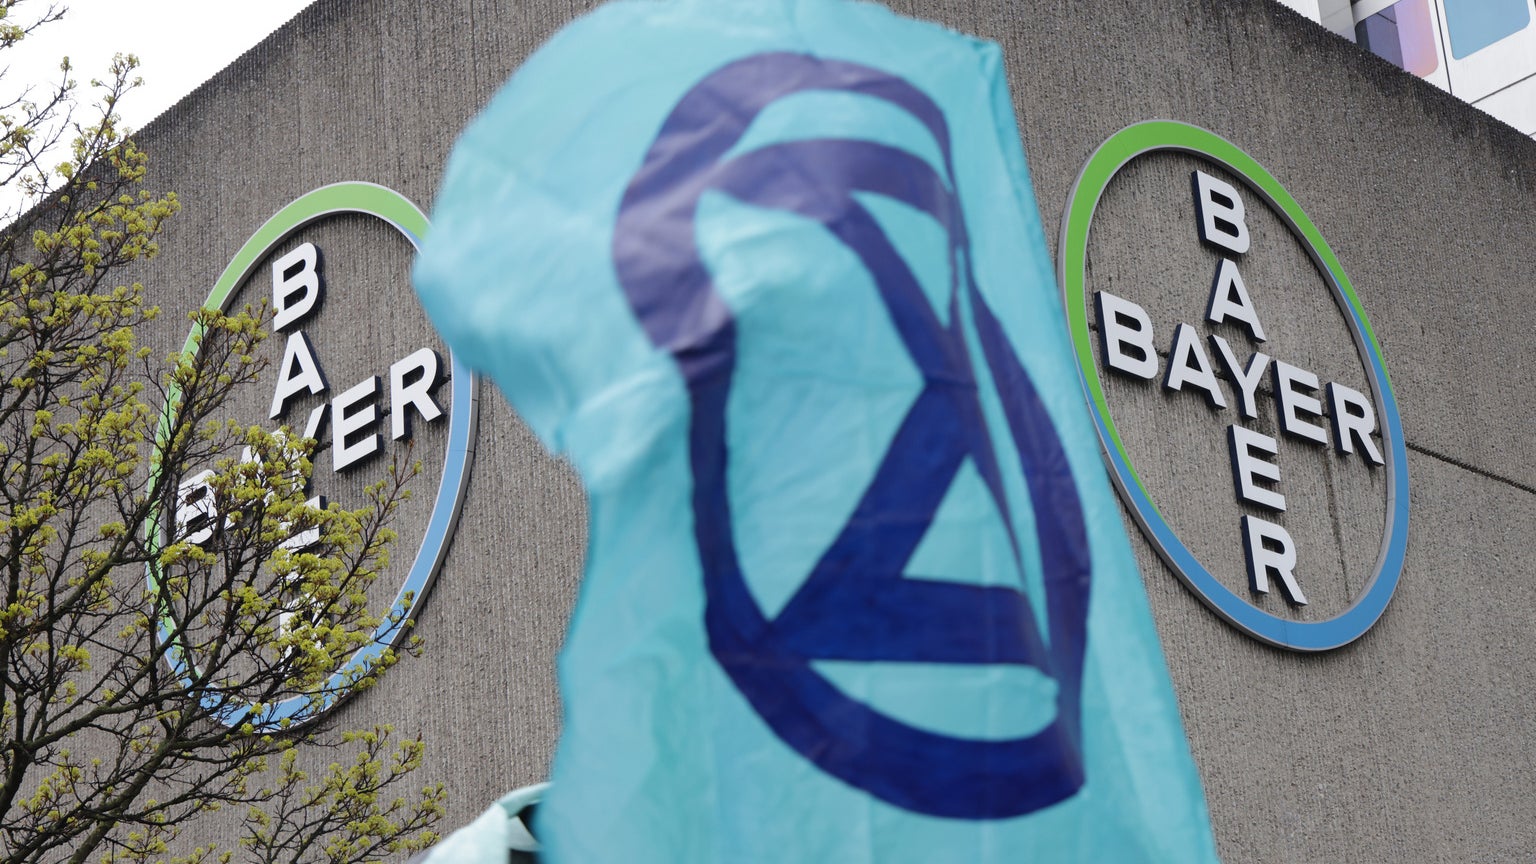 Bluebell pressures Bayer to separate crop and pharma units